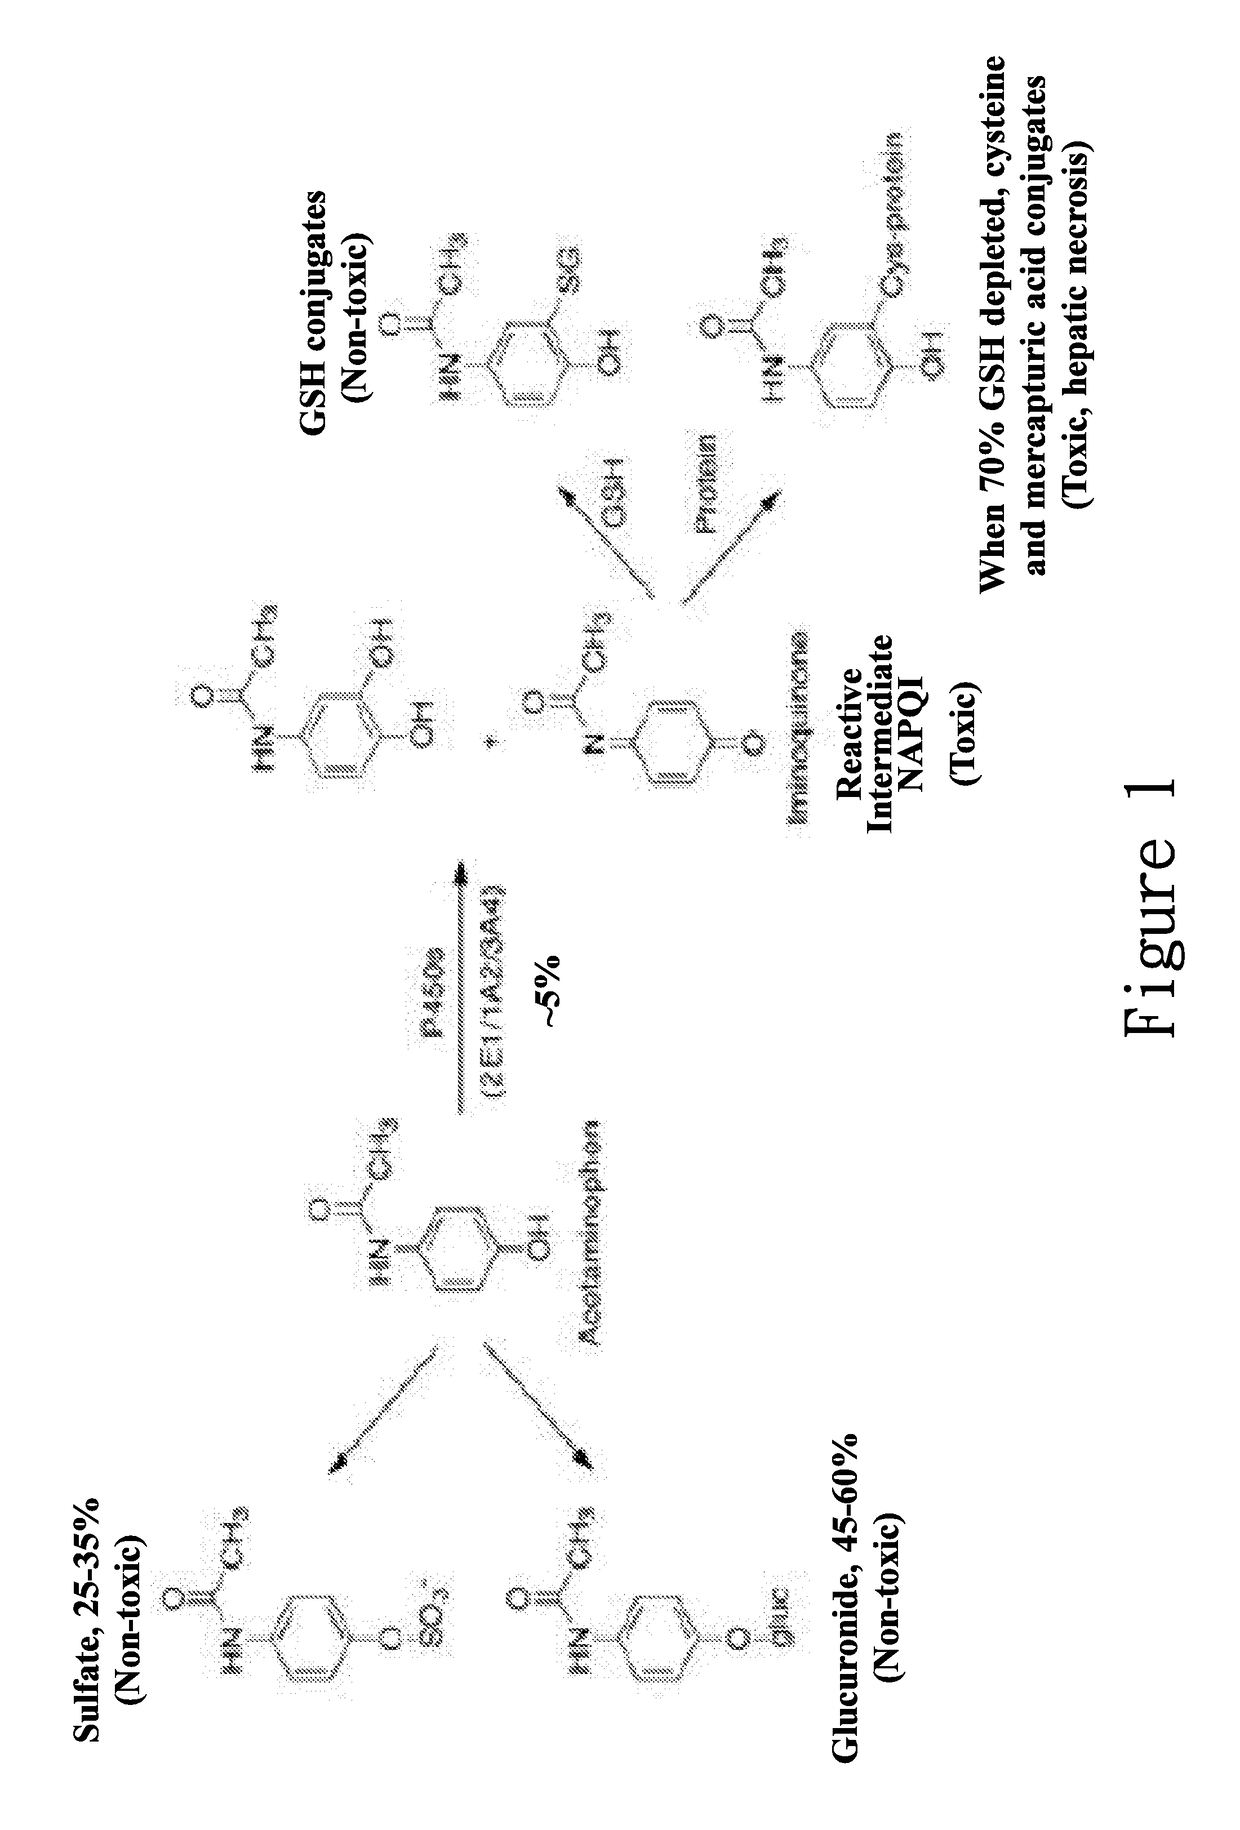 New hepatotoxicity-free pharmaceutical composition containing acetaminophen drugs